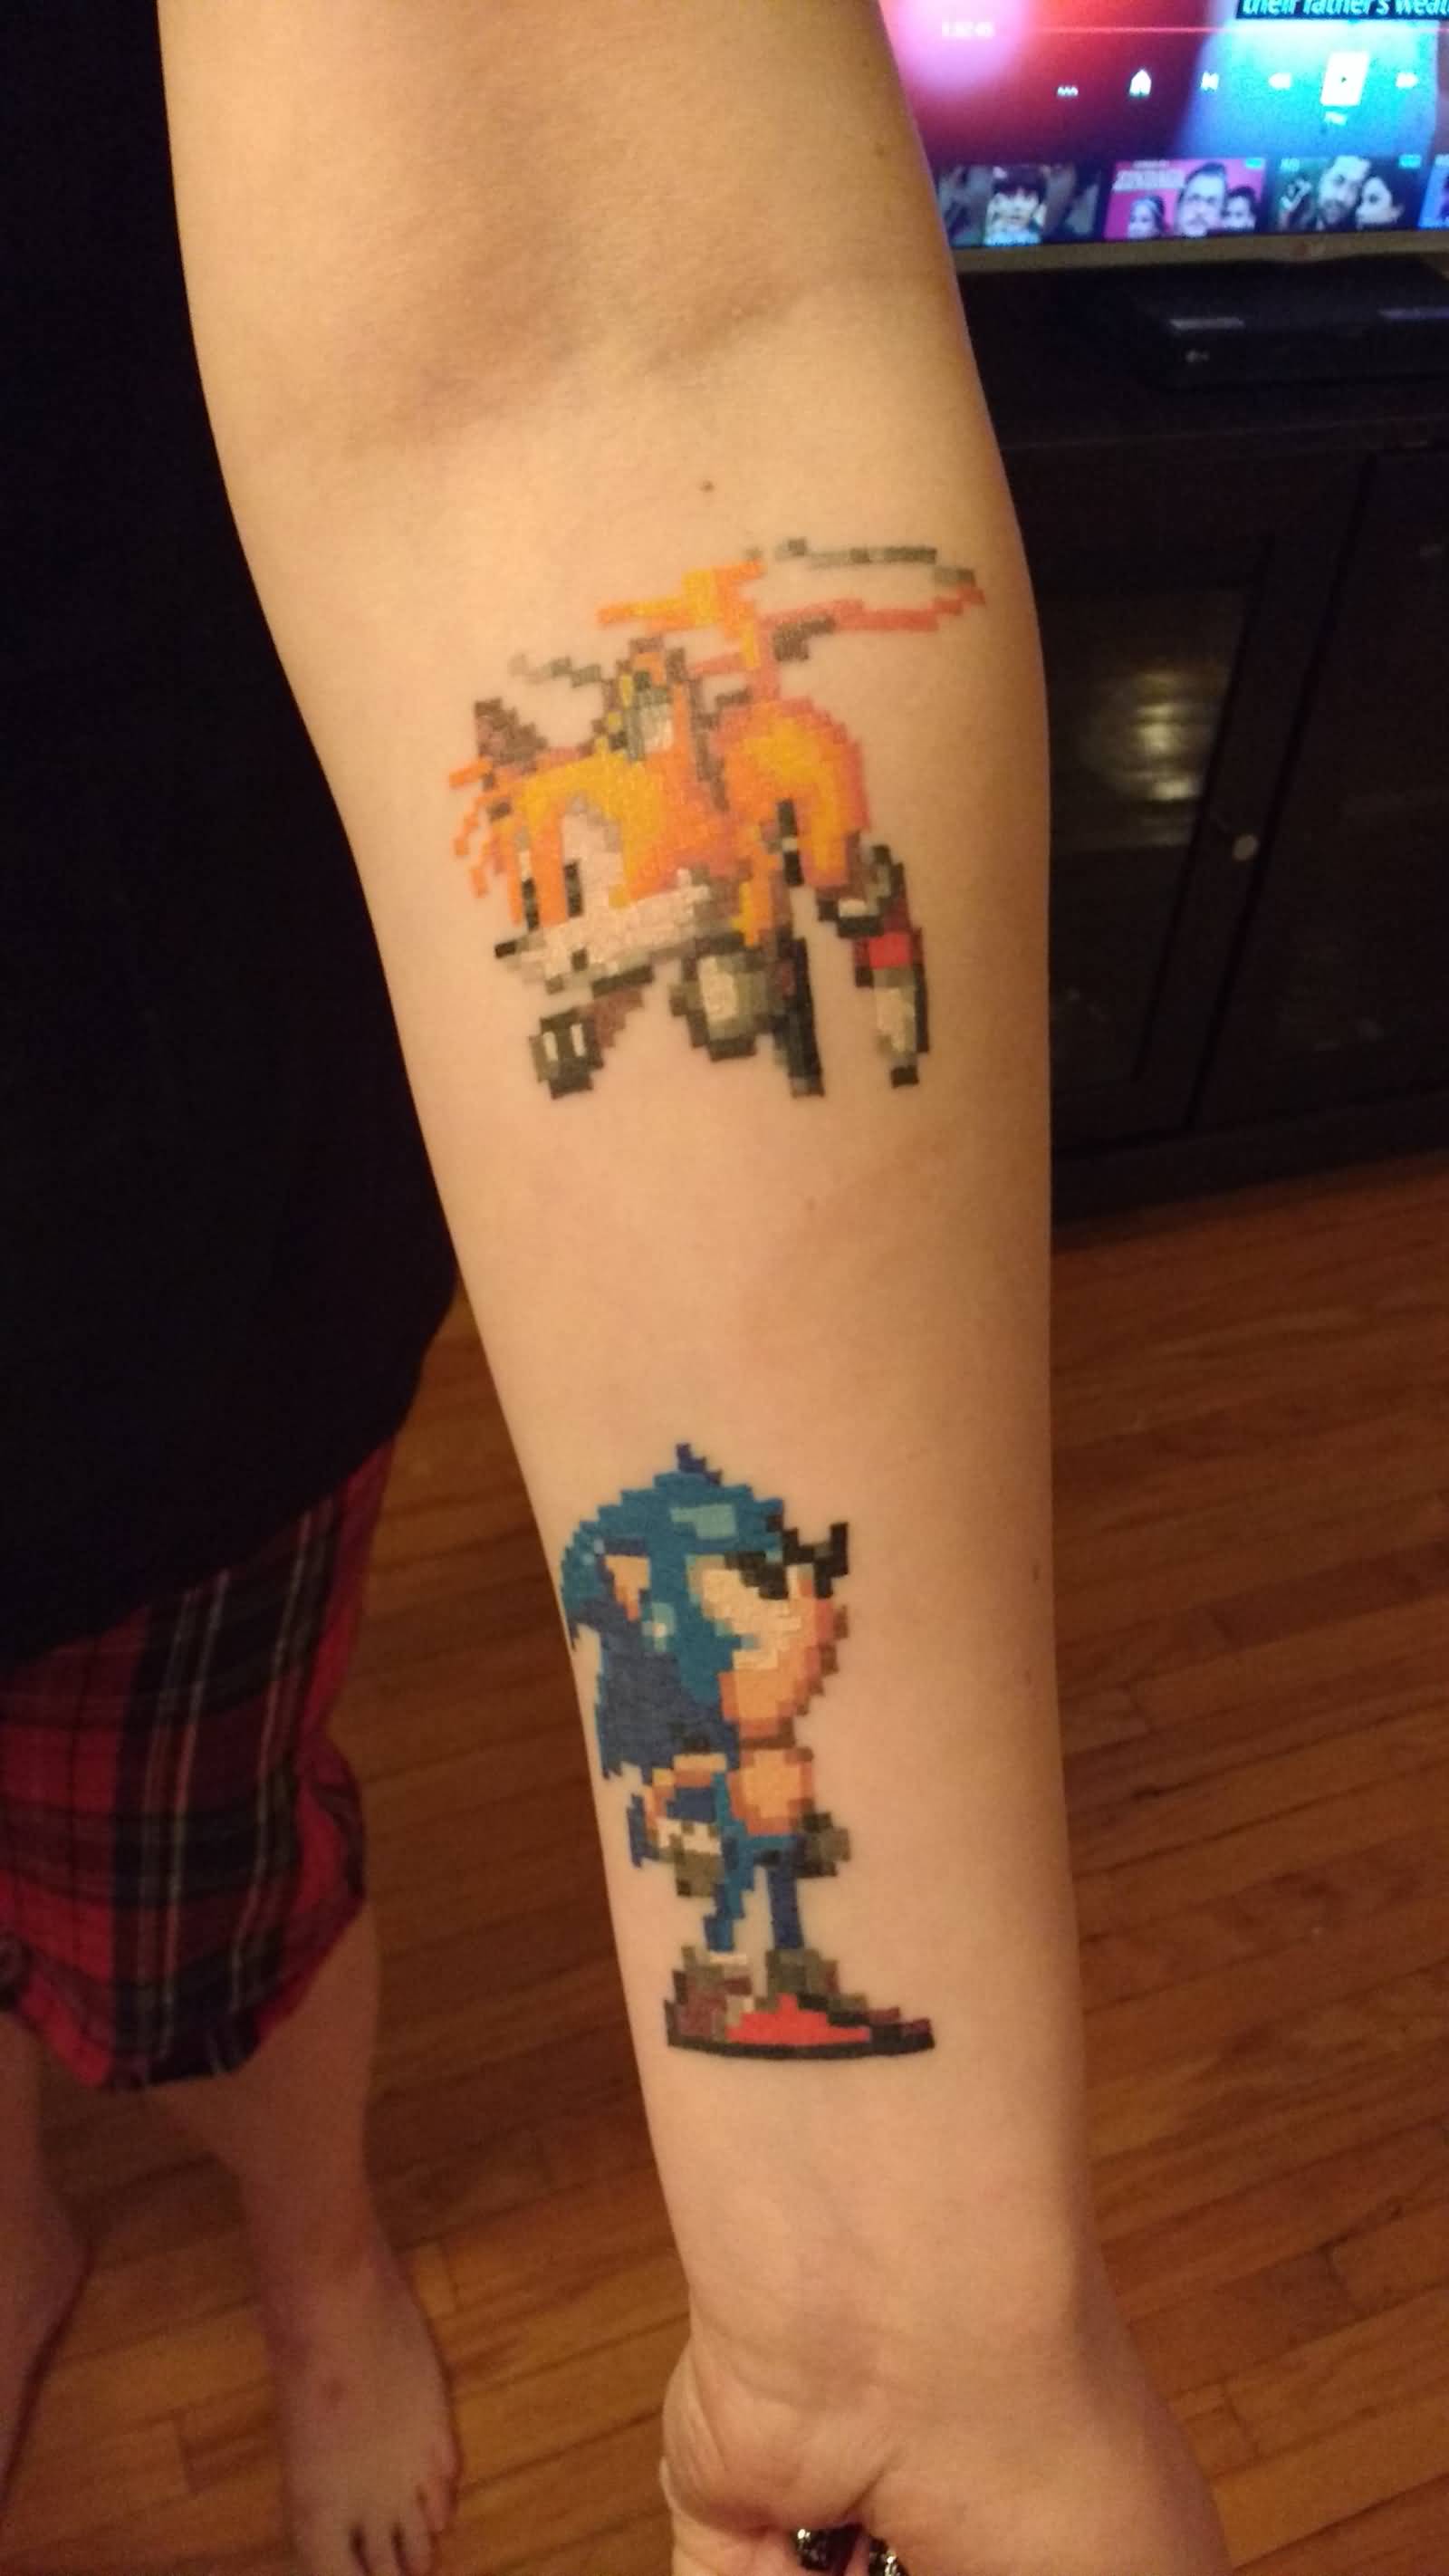 Sonic And Tails 16 Bit Tattoo On Forearm By Neil